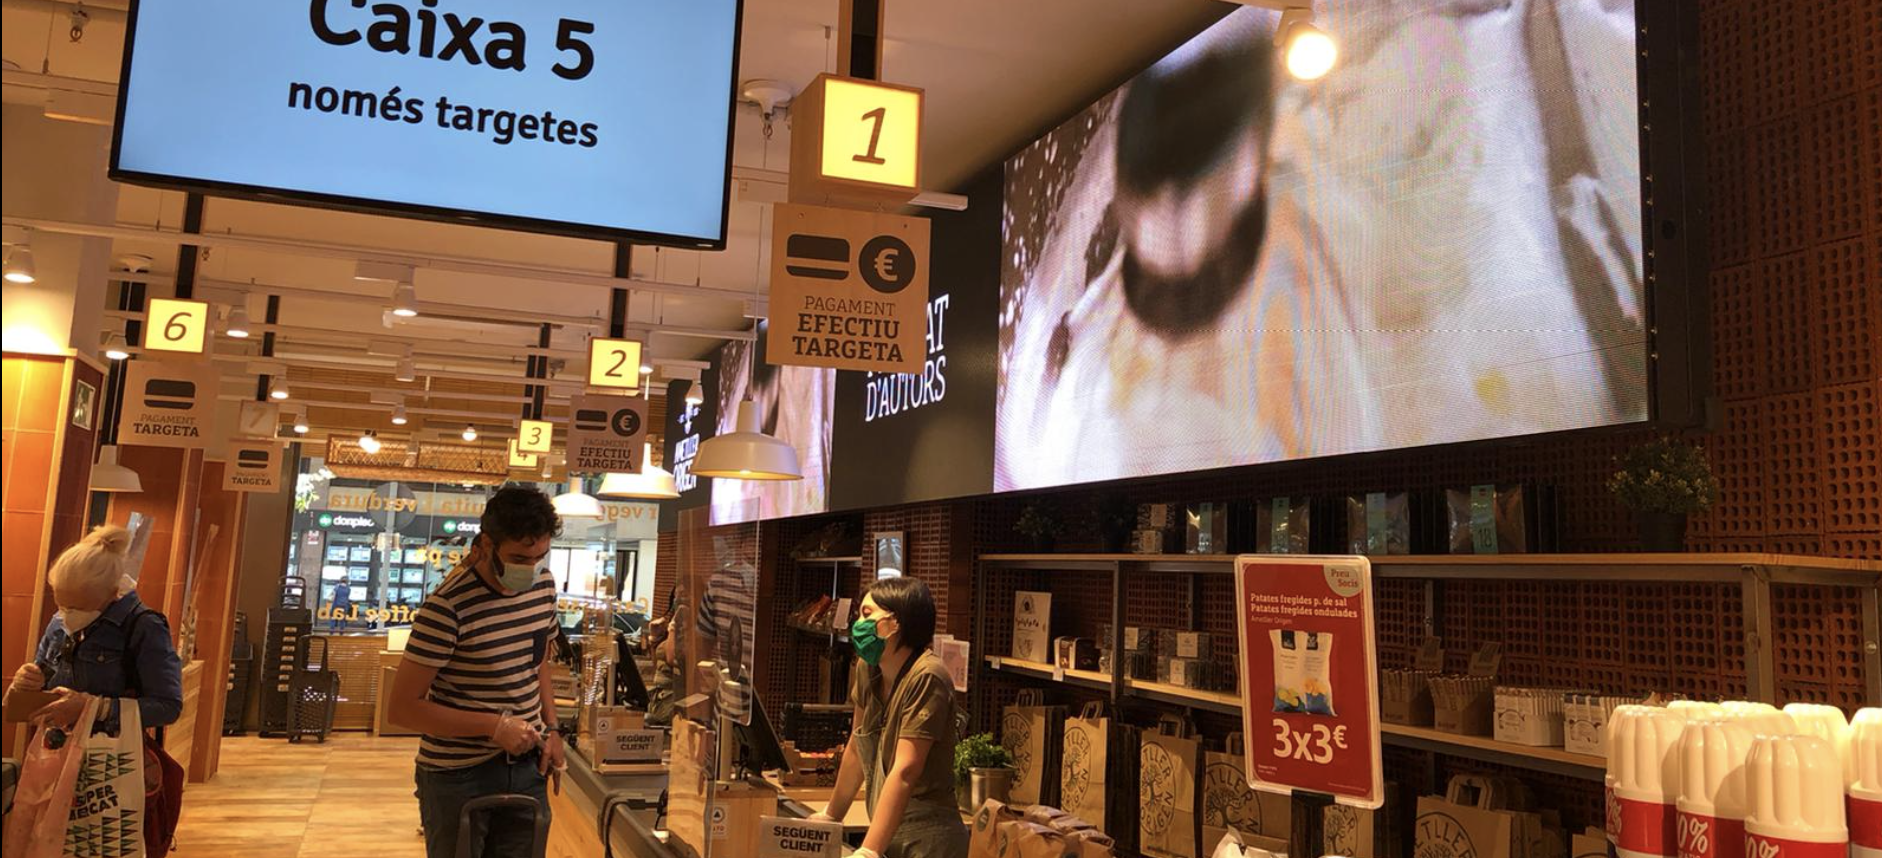 AV in retail physical spaces: Customer first